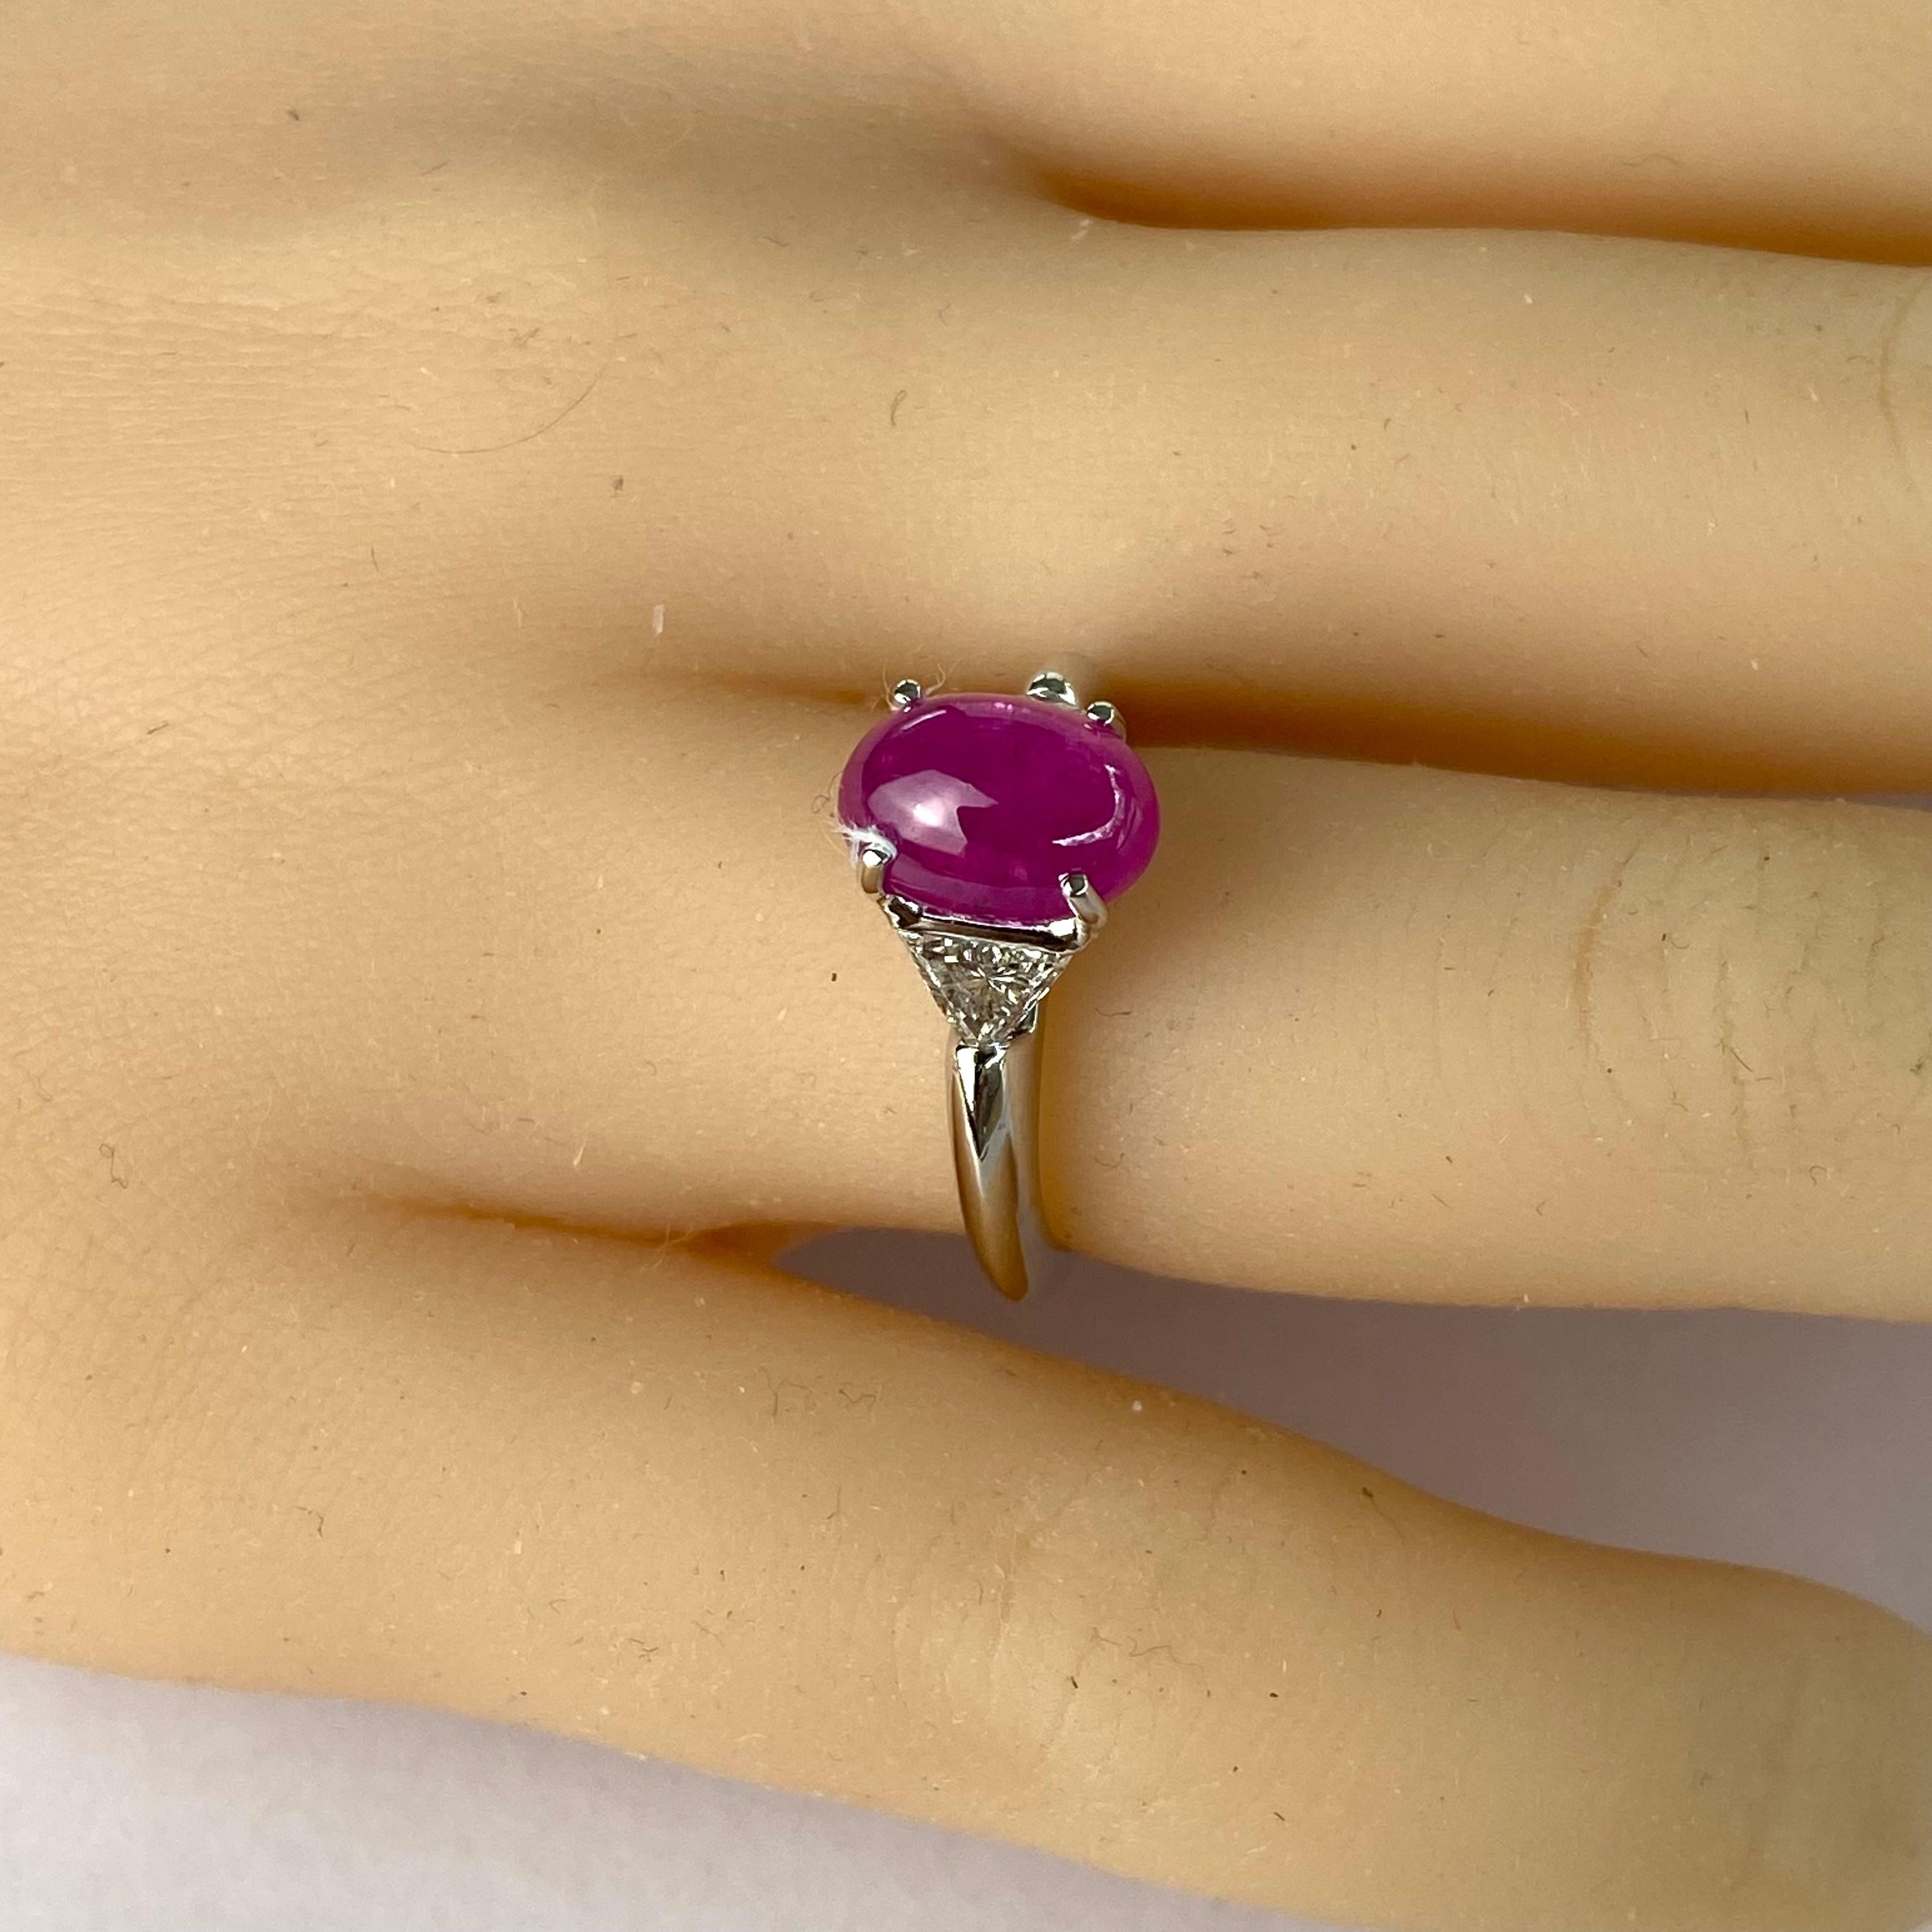 Elevate your engagement with this exquisite vintage-inspired ring, crafted to captivate hearts and ignite everlasting love. This platinum masterpiece features a mesmerizing Cabochon Burma Red Ruby as its center stone, weighing a magnificent 3.70